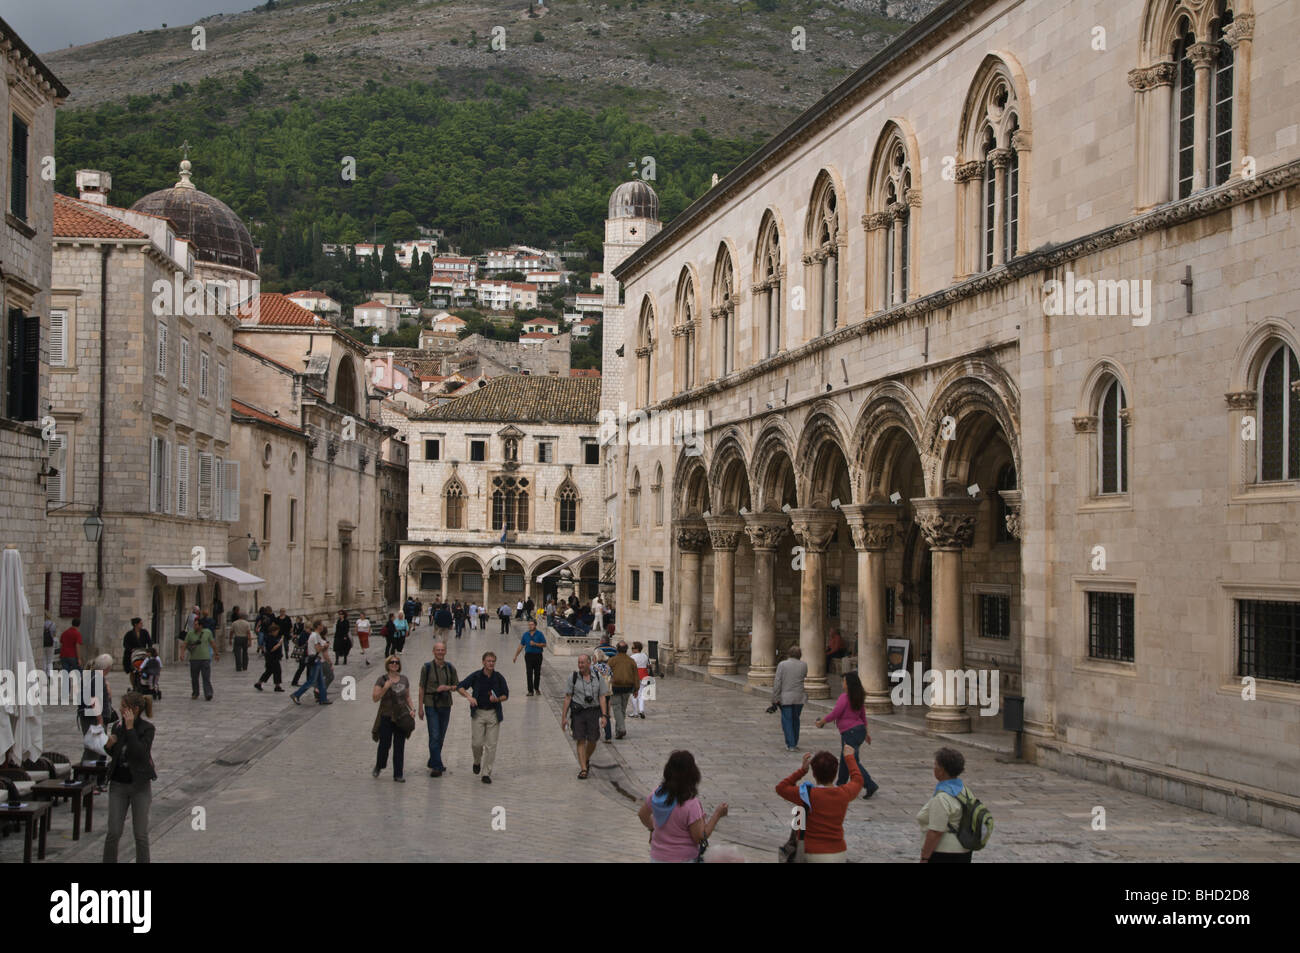 The Old City / Sponza Palace & Bell Tower, Dubrovnik Stock Photo